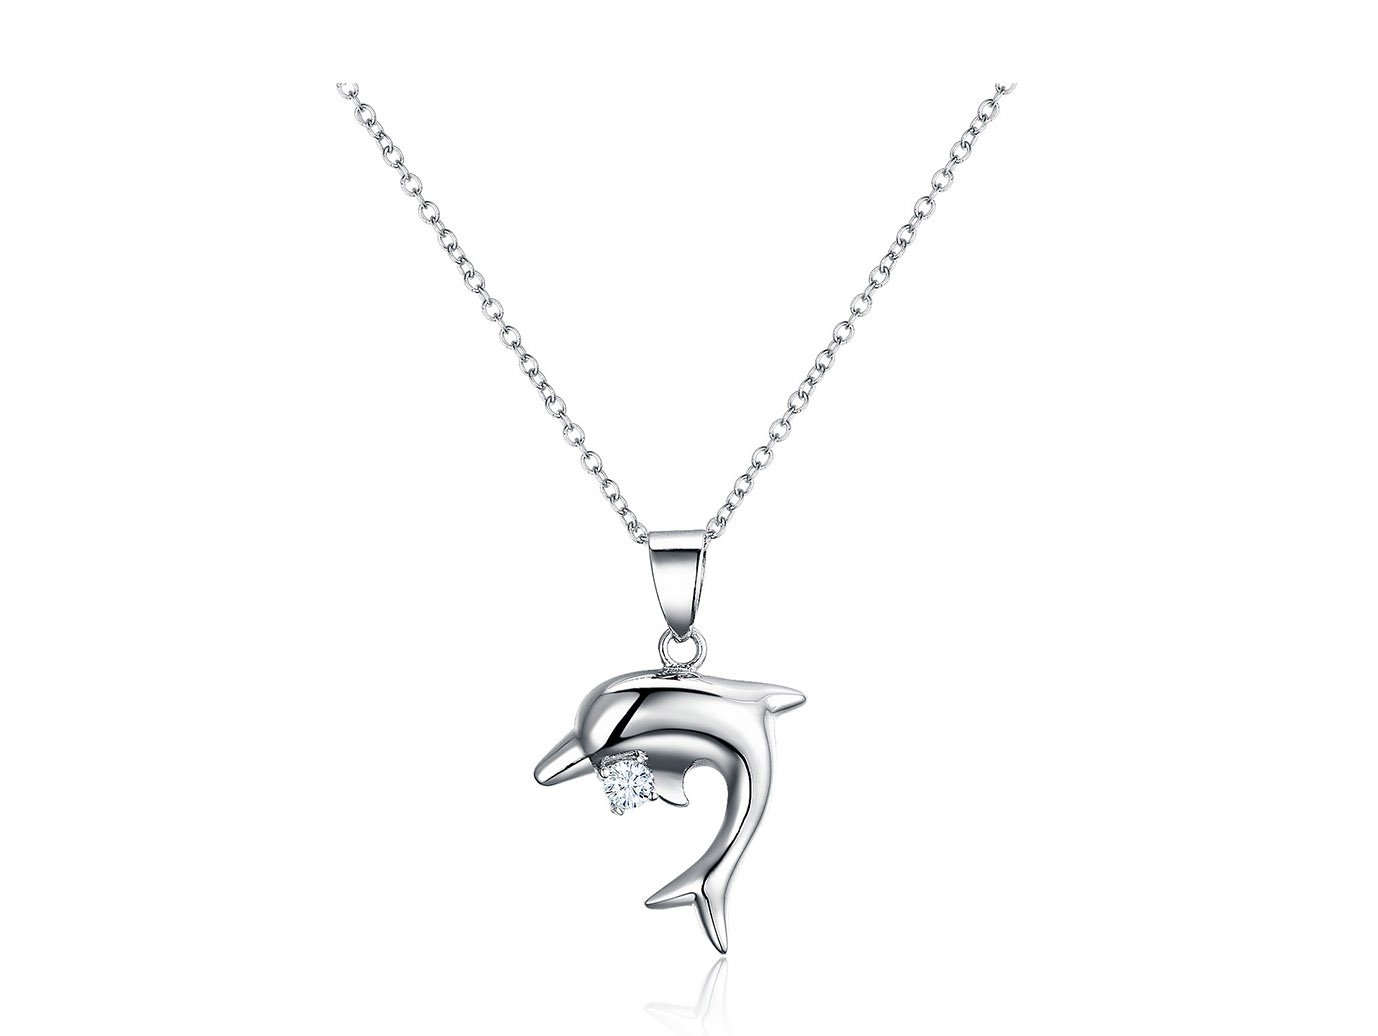 Dolphin Pendant Necklace sa Sterling Silver